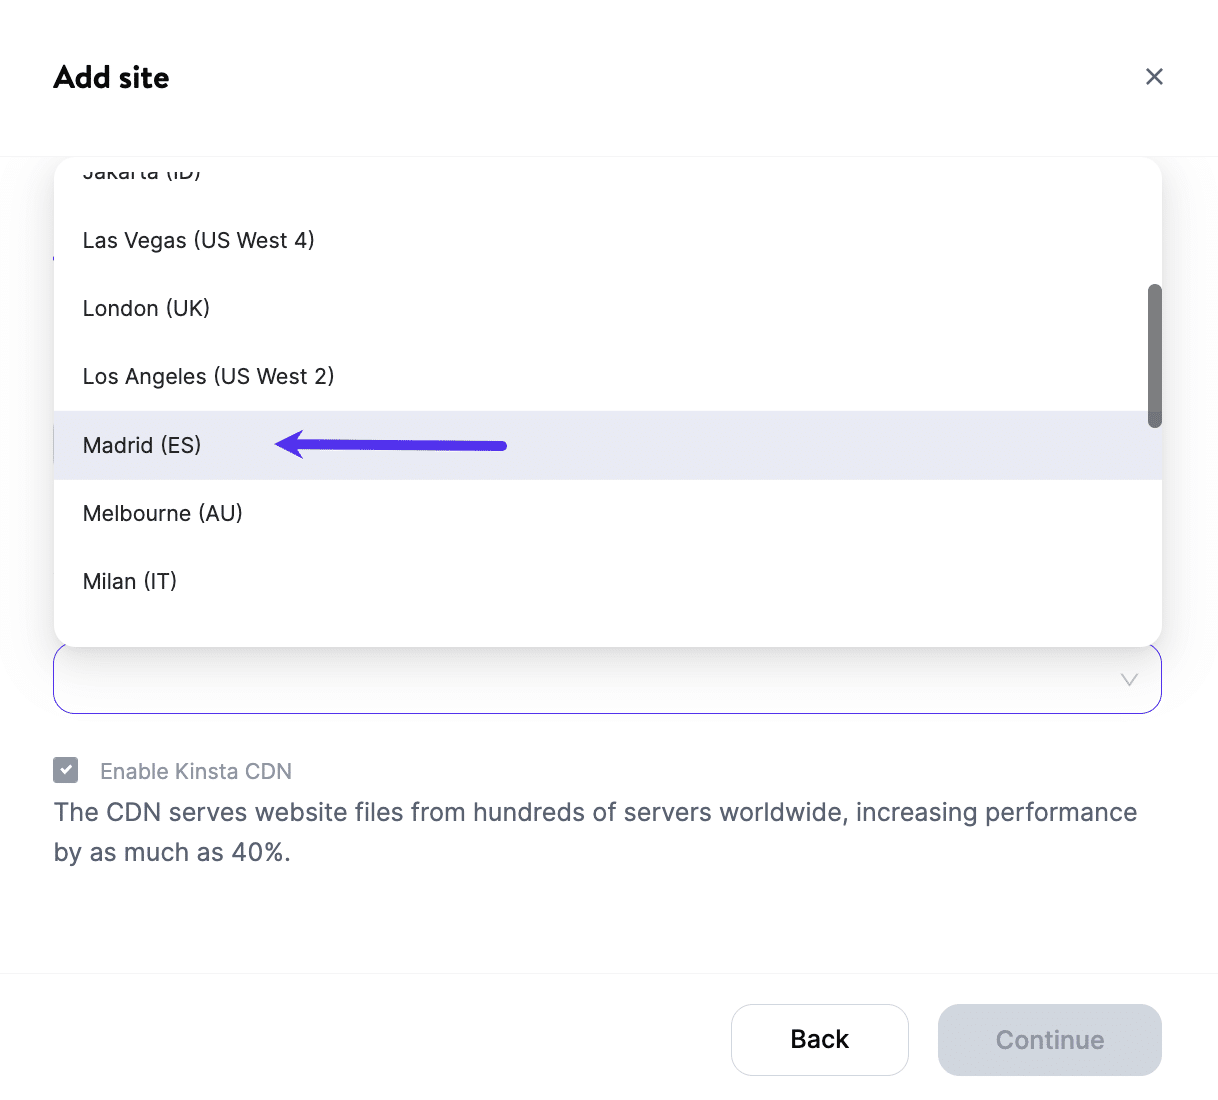 A screenshot of MyKinsta showing the "Add Site" location drop-down set to "Madrid (ES)".